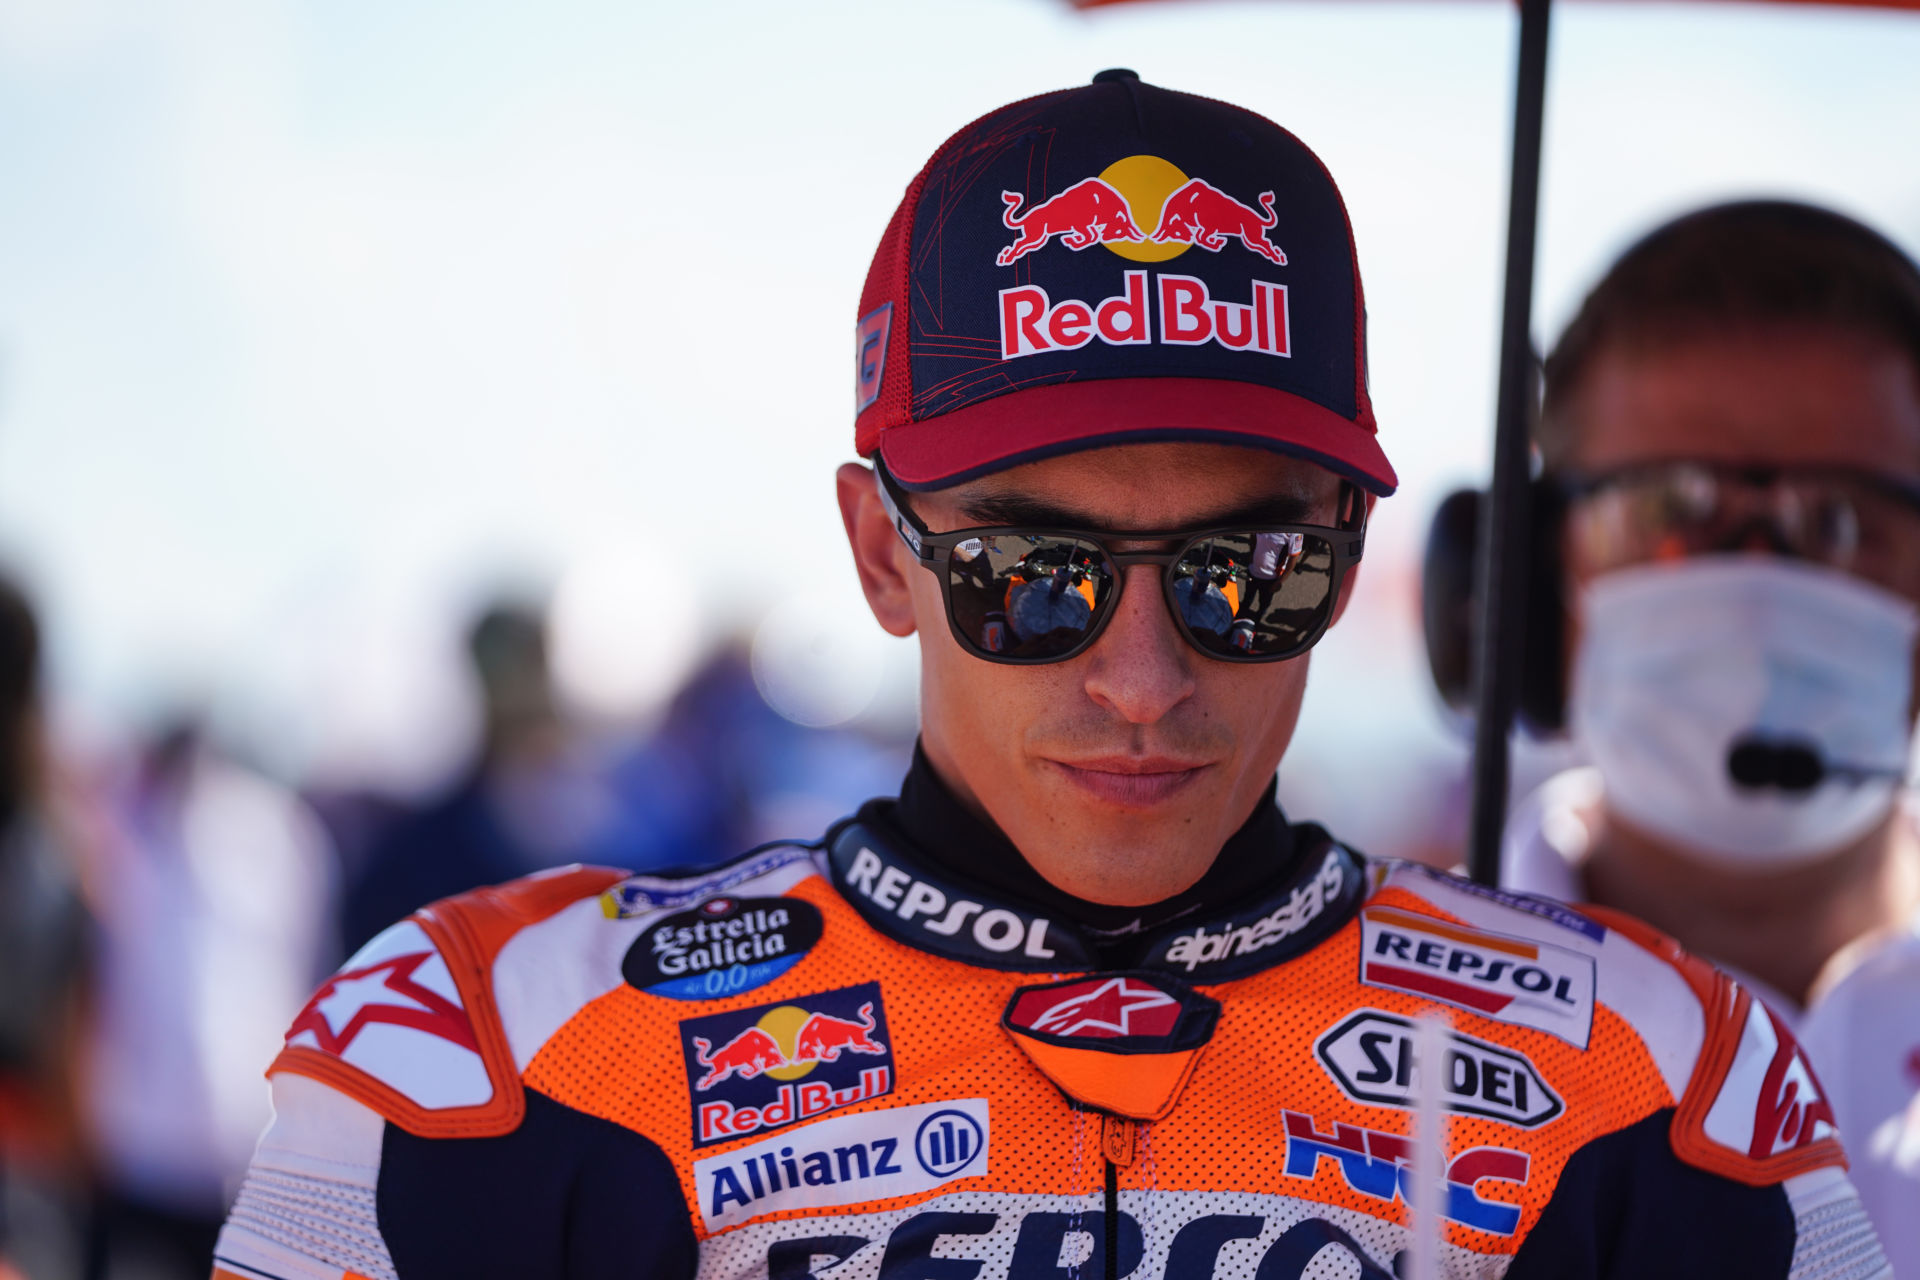 Marc Marquez suffered a concussion while training and will miss the Algarve GP. Photo courtesy Repsol Honda.